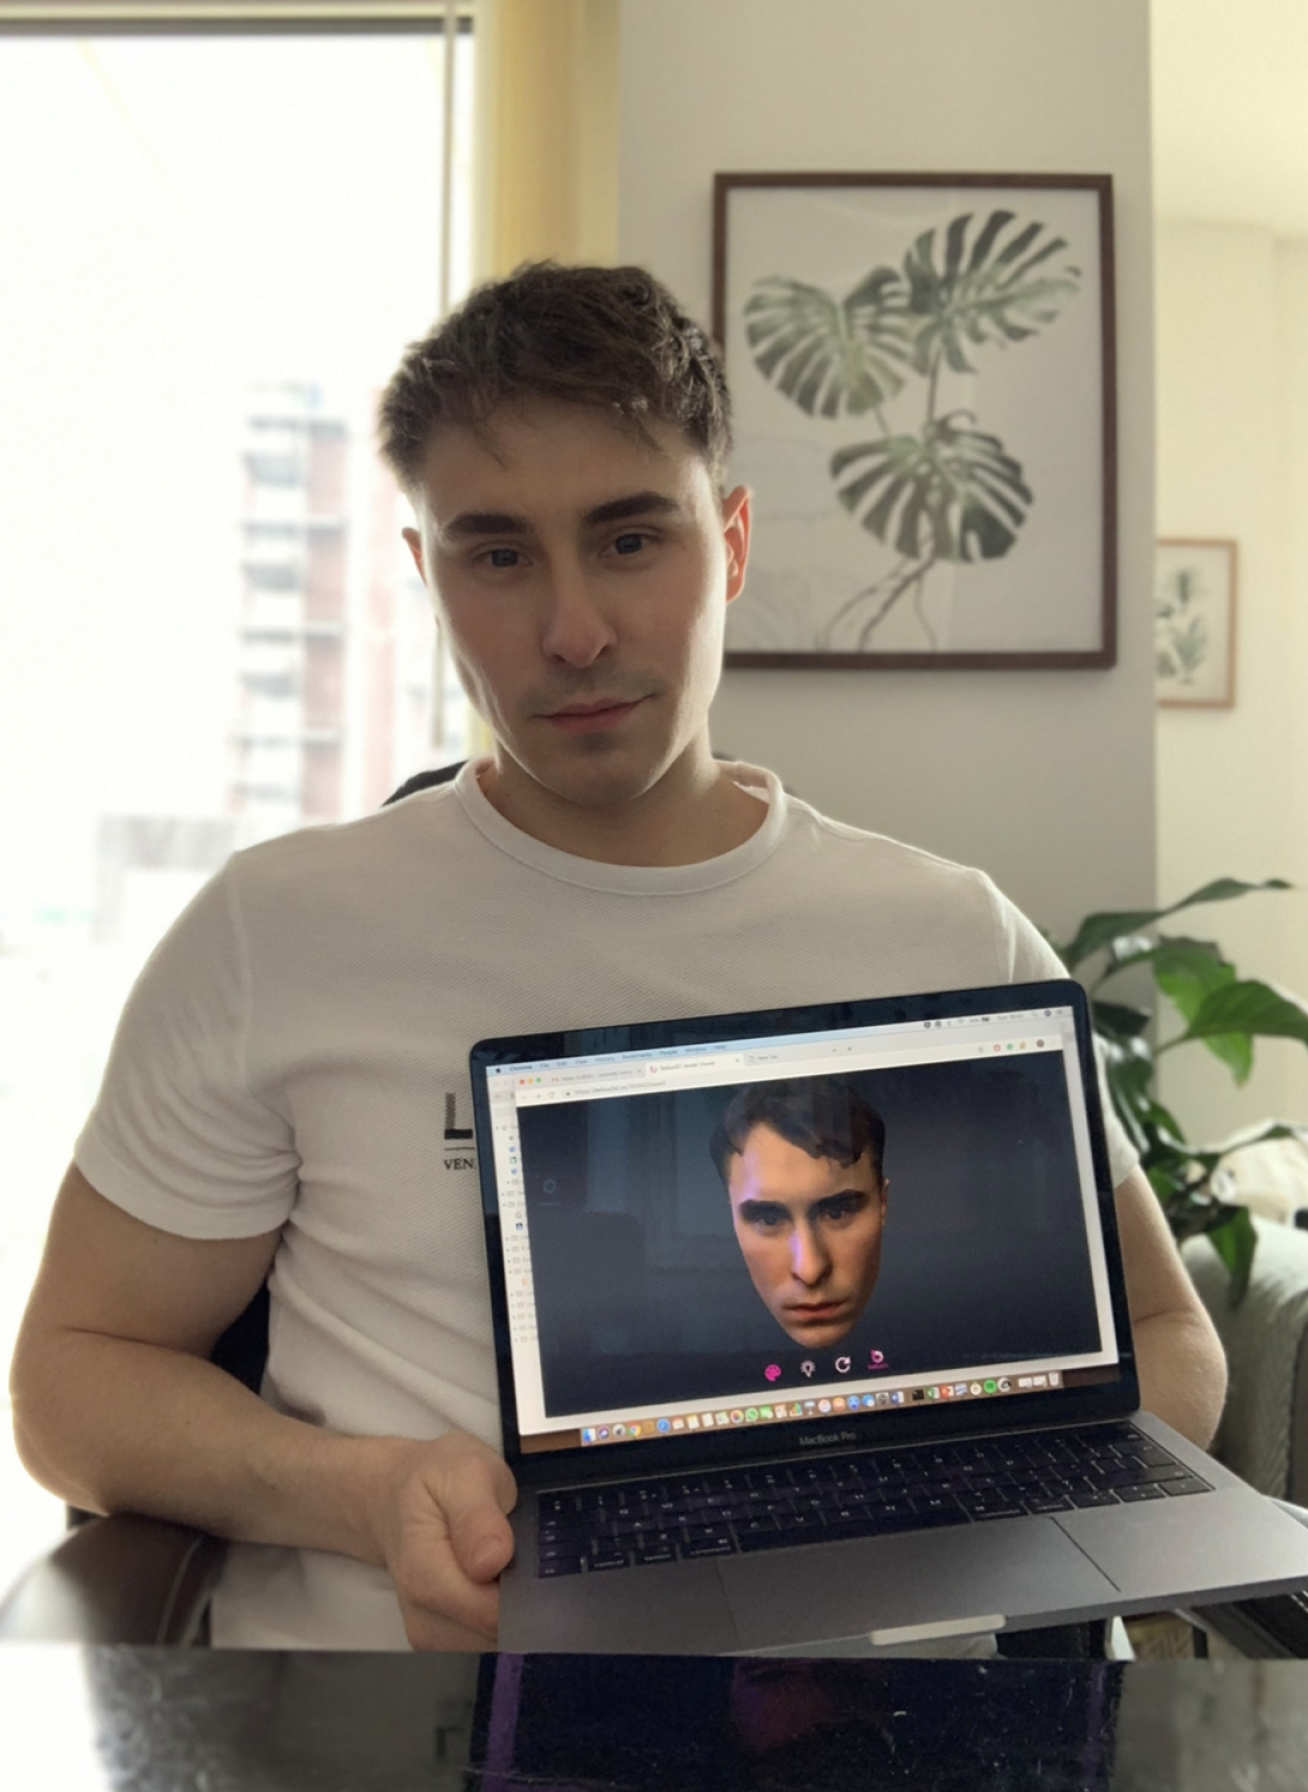 PhD student Tom Versluys holding a computer scan image of his face